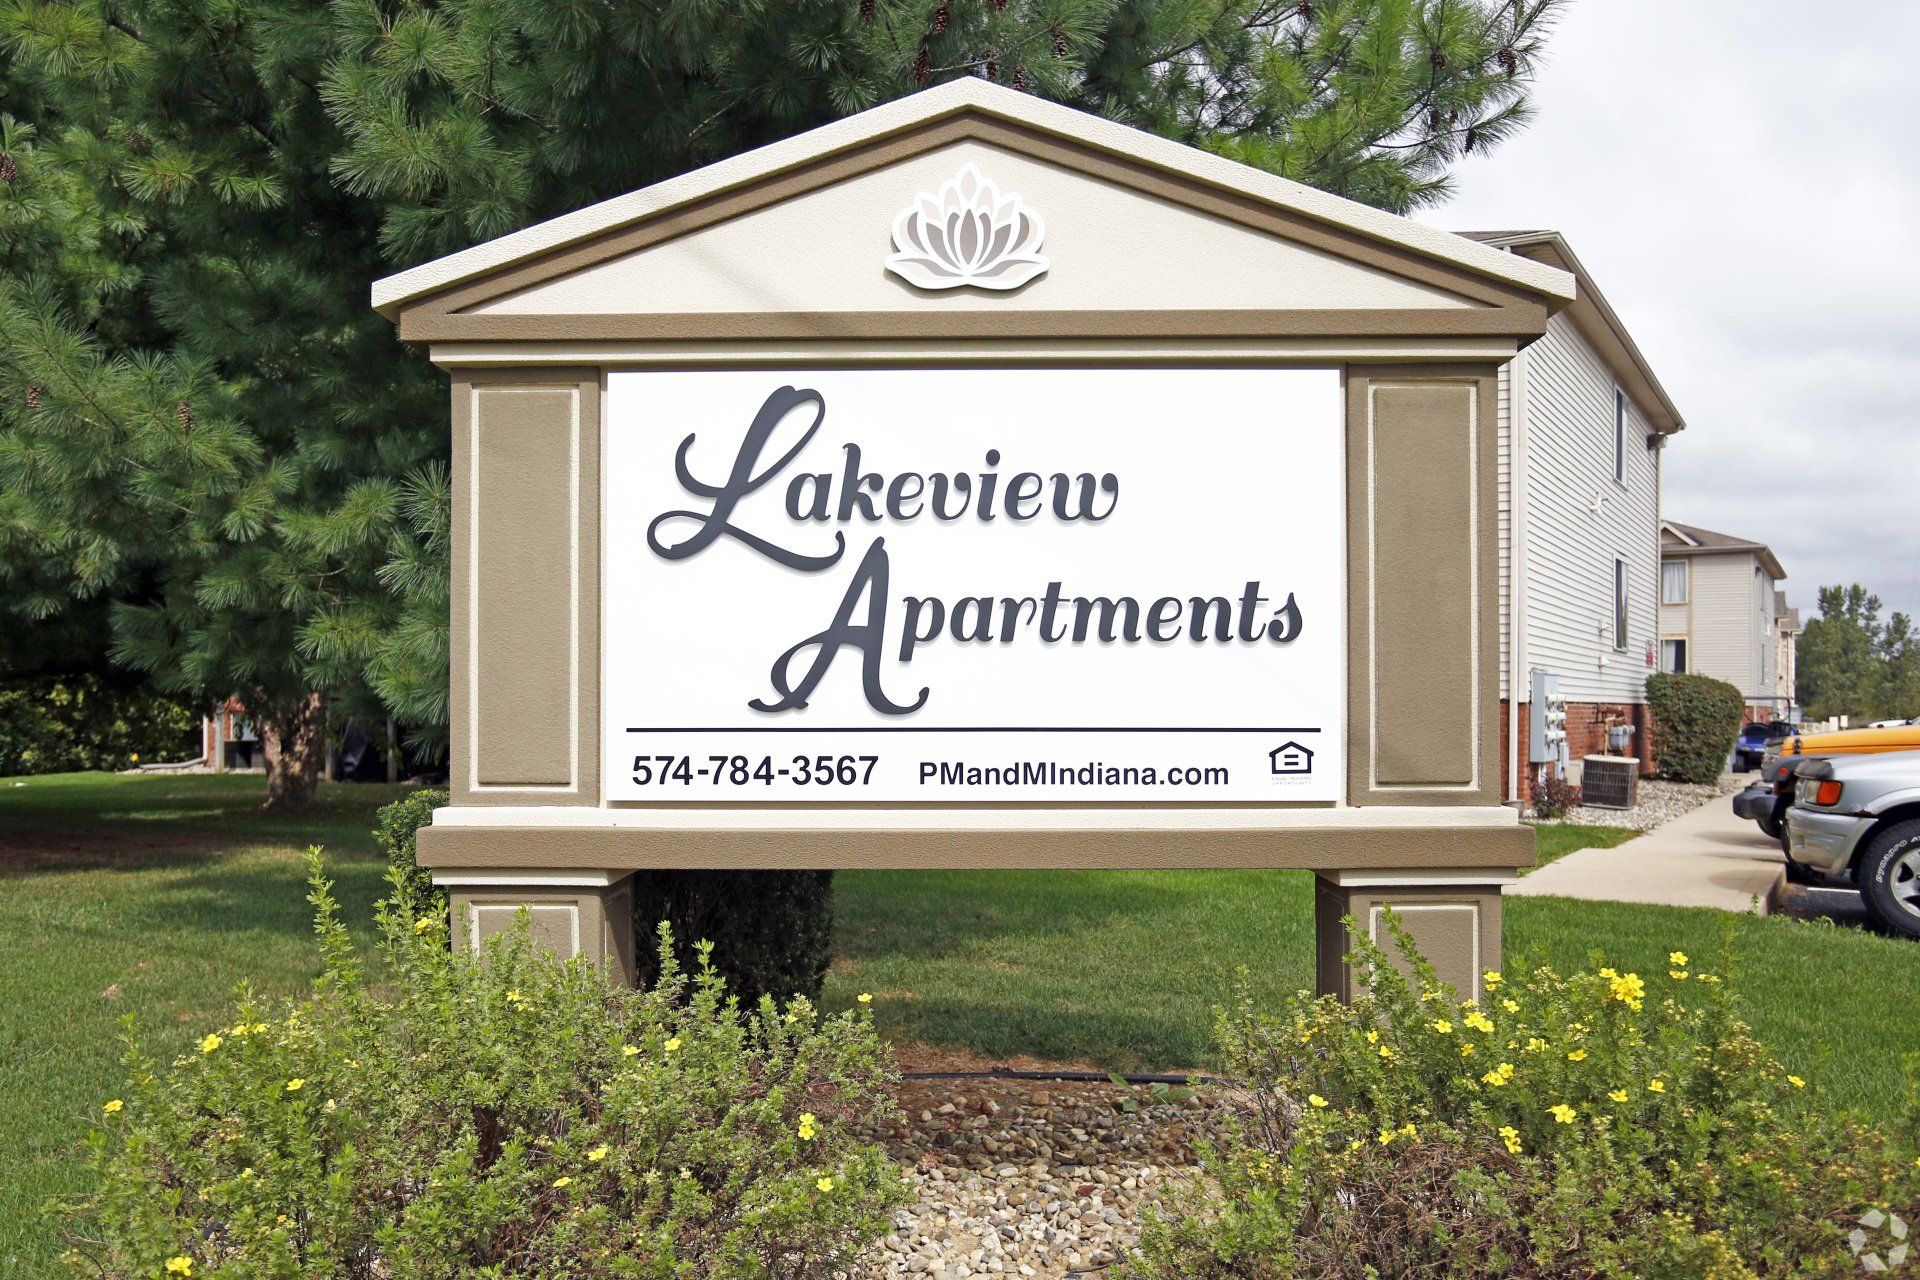 Lakeview Apts building sign